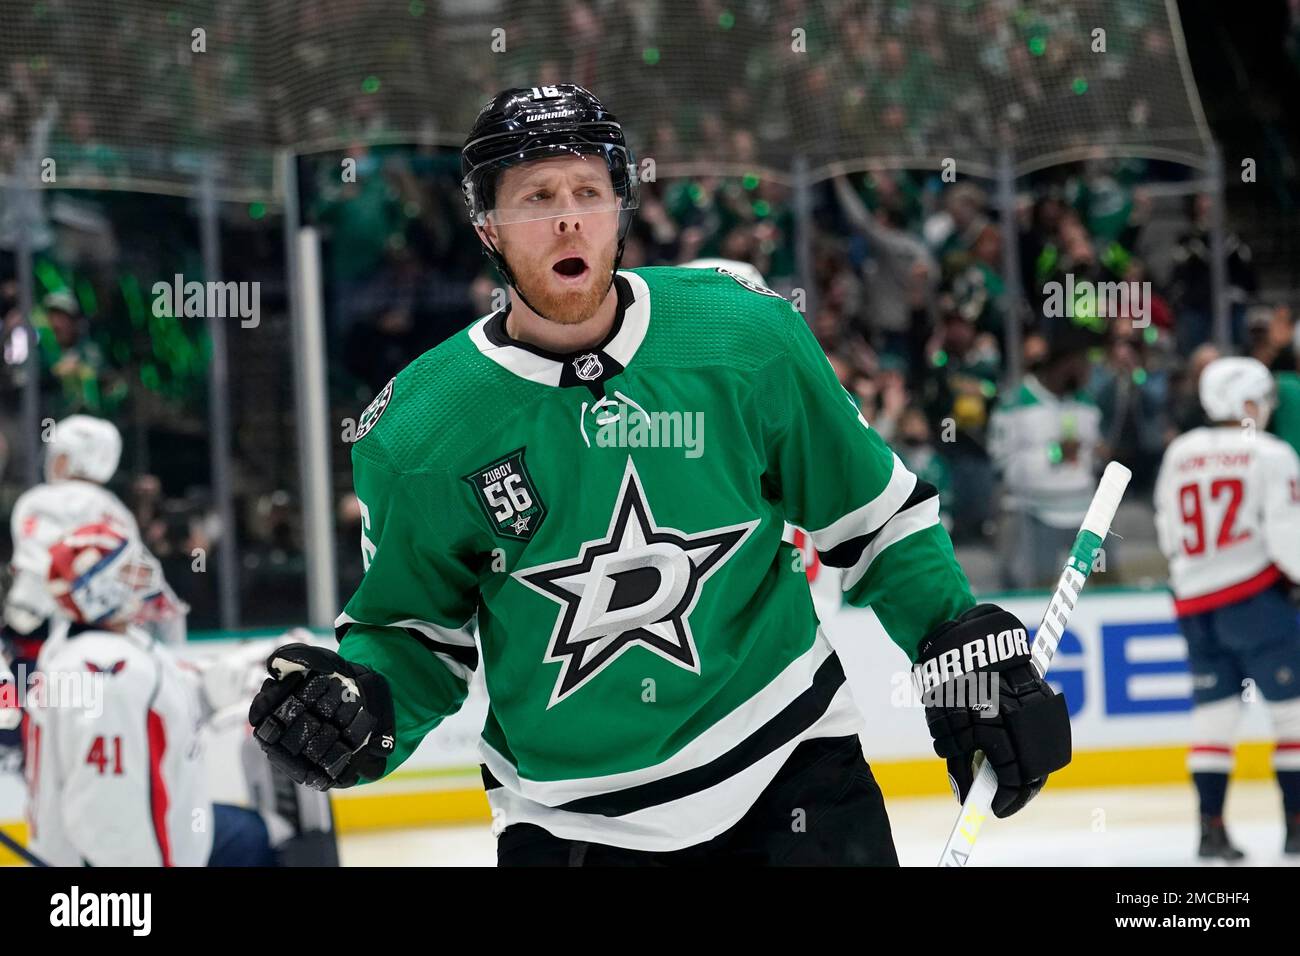 Dallas Stars Joe Pavelski celebrates after scoring a goal that was disallowed following a video replay during an NHL hockey game against the Washington Capitals in Dallas, Friday, Jan